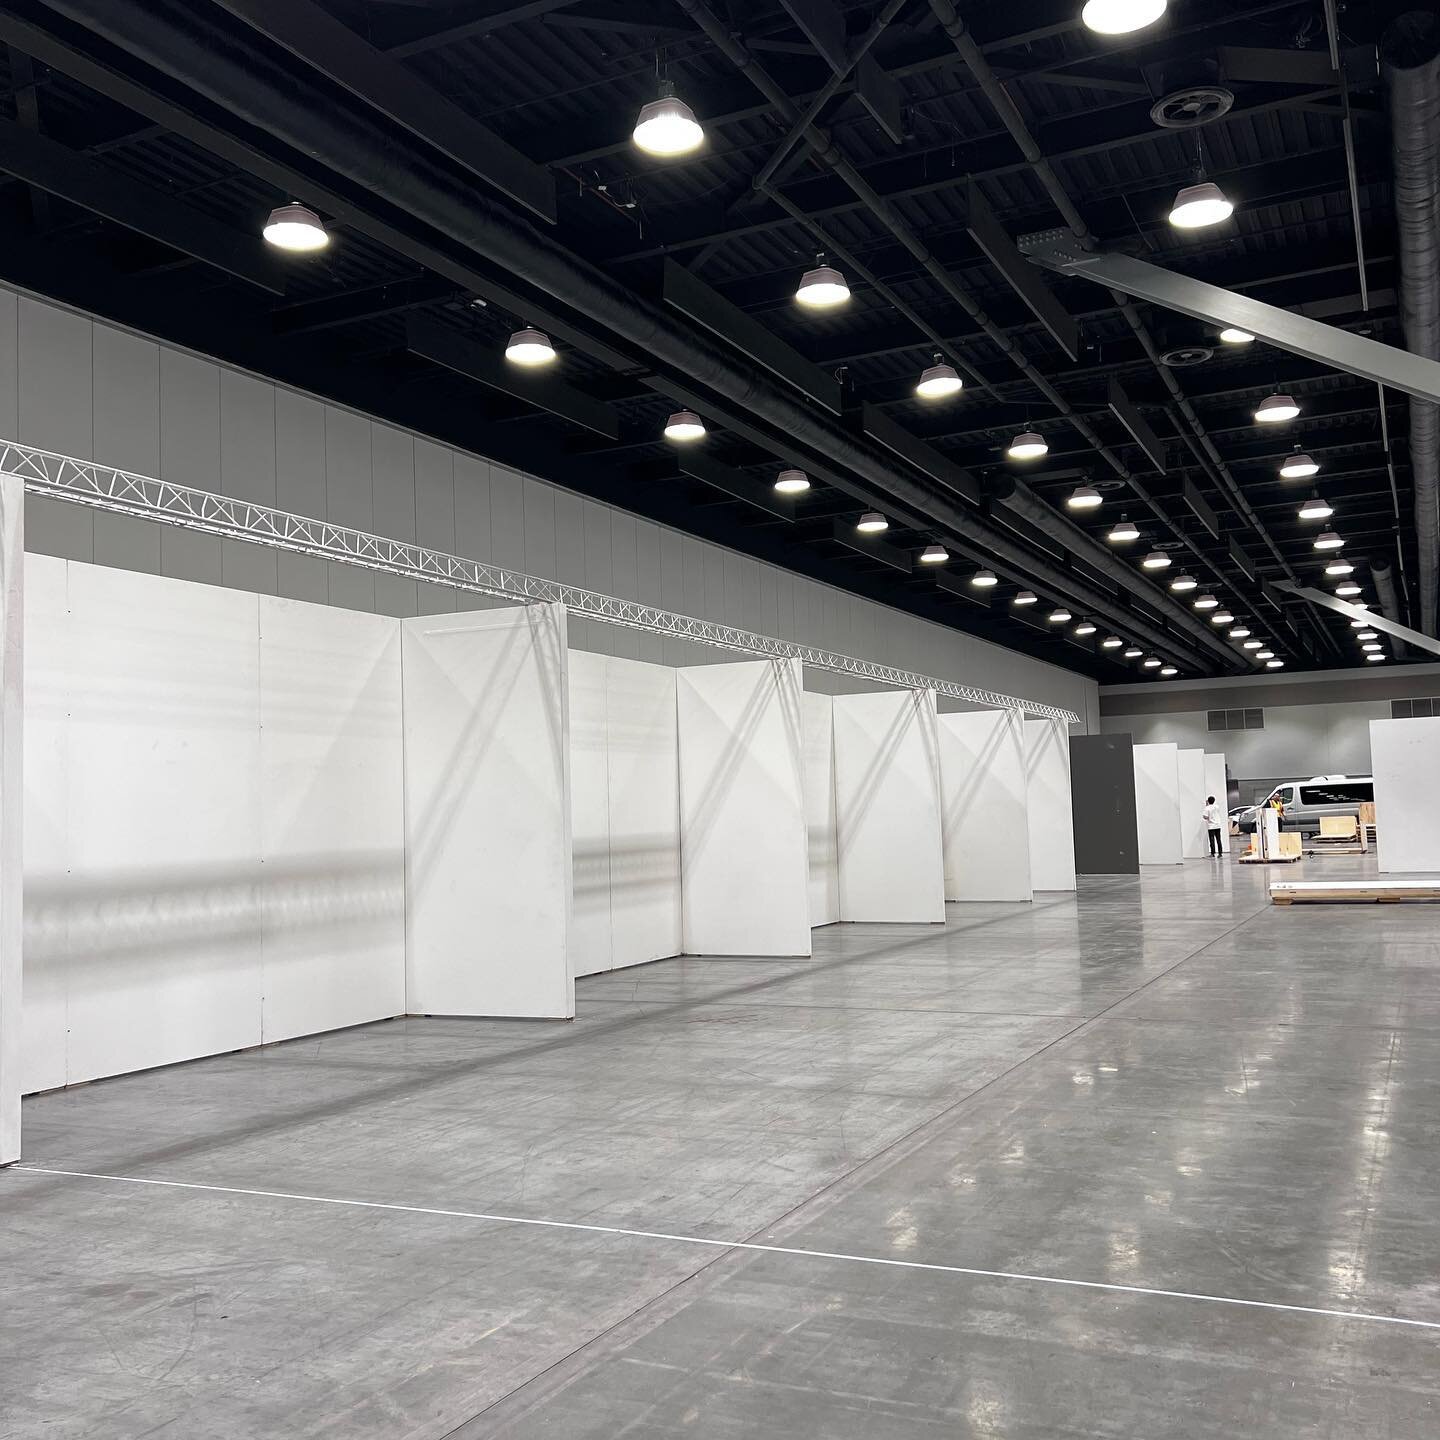 This is what an International Art Fair looks like before it&rsquo;s filled with world class art&hellip; stay tuned for more!  @yukonprize @artvancouver 

#artiseverywhere #yukonprize #artvancouver #internationalartfair #artexhibition #pointsnorthcrea